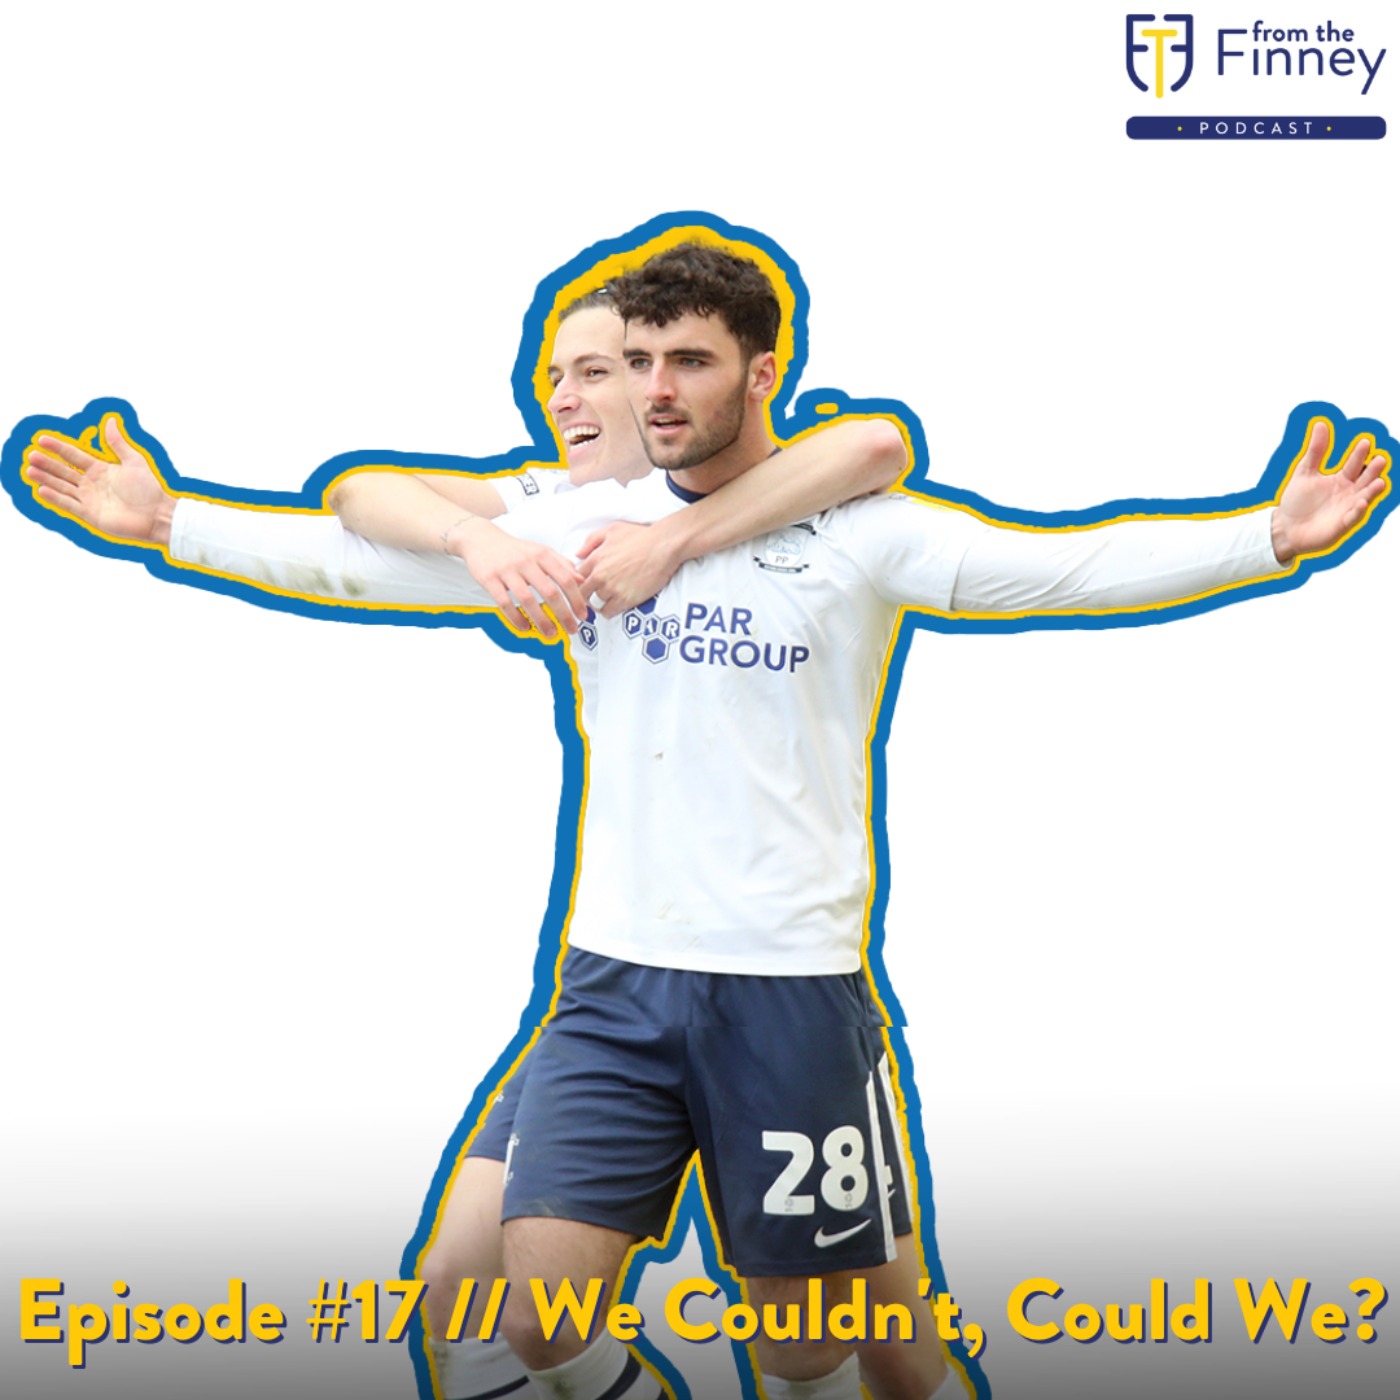 Episode #17 // We Couldn't, Could We? // From the Finney Podcast